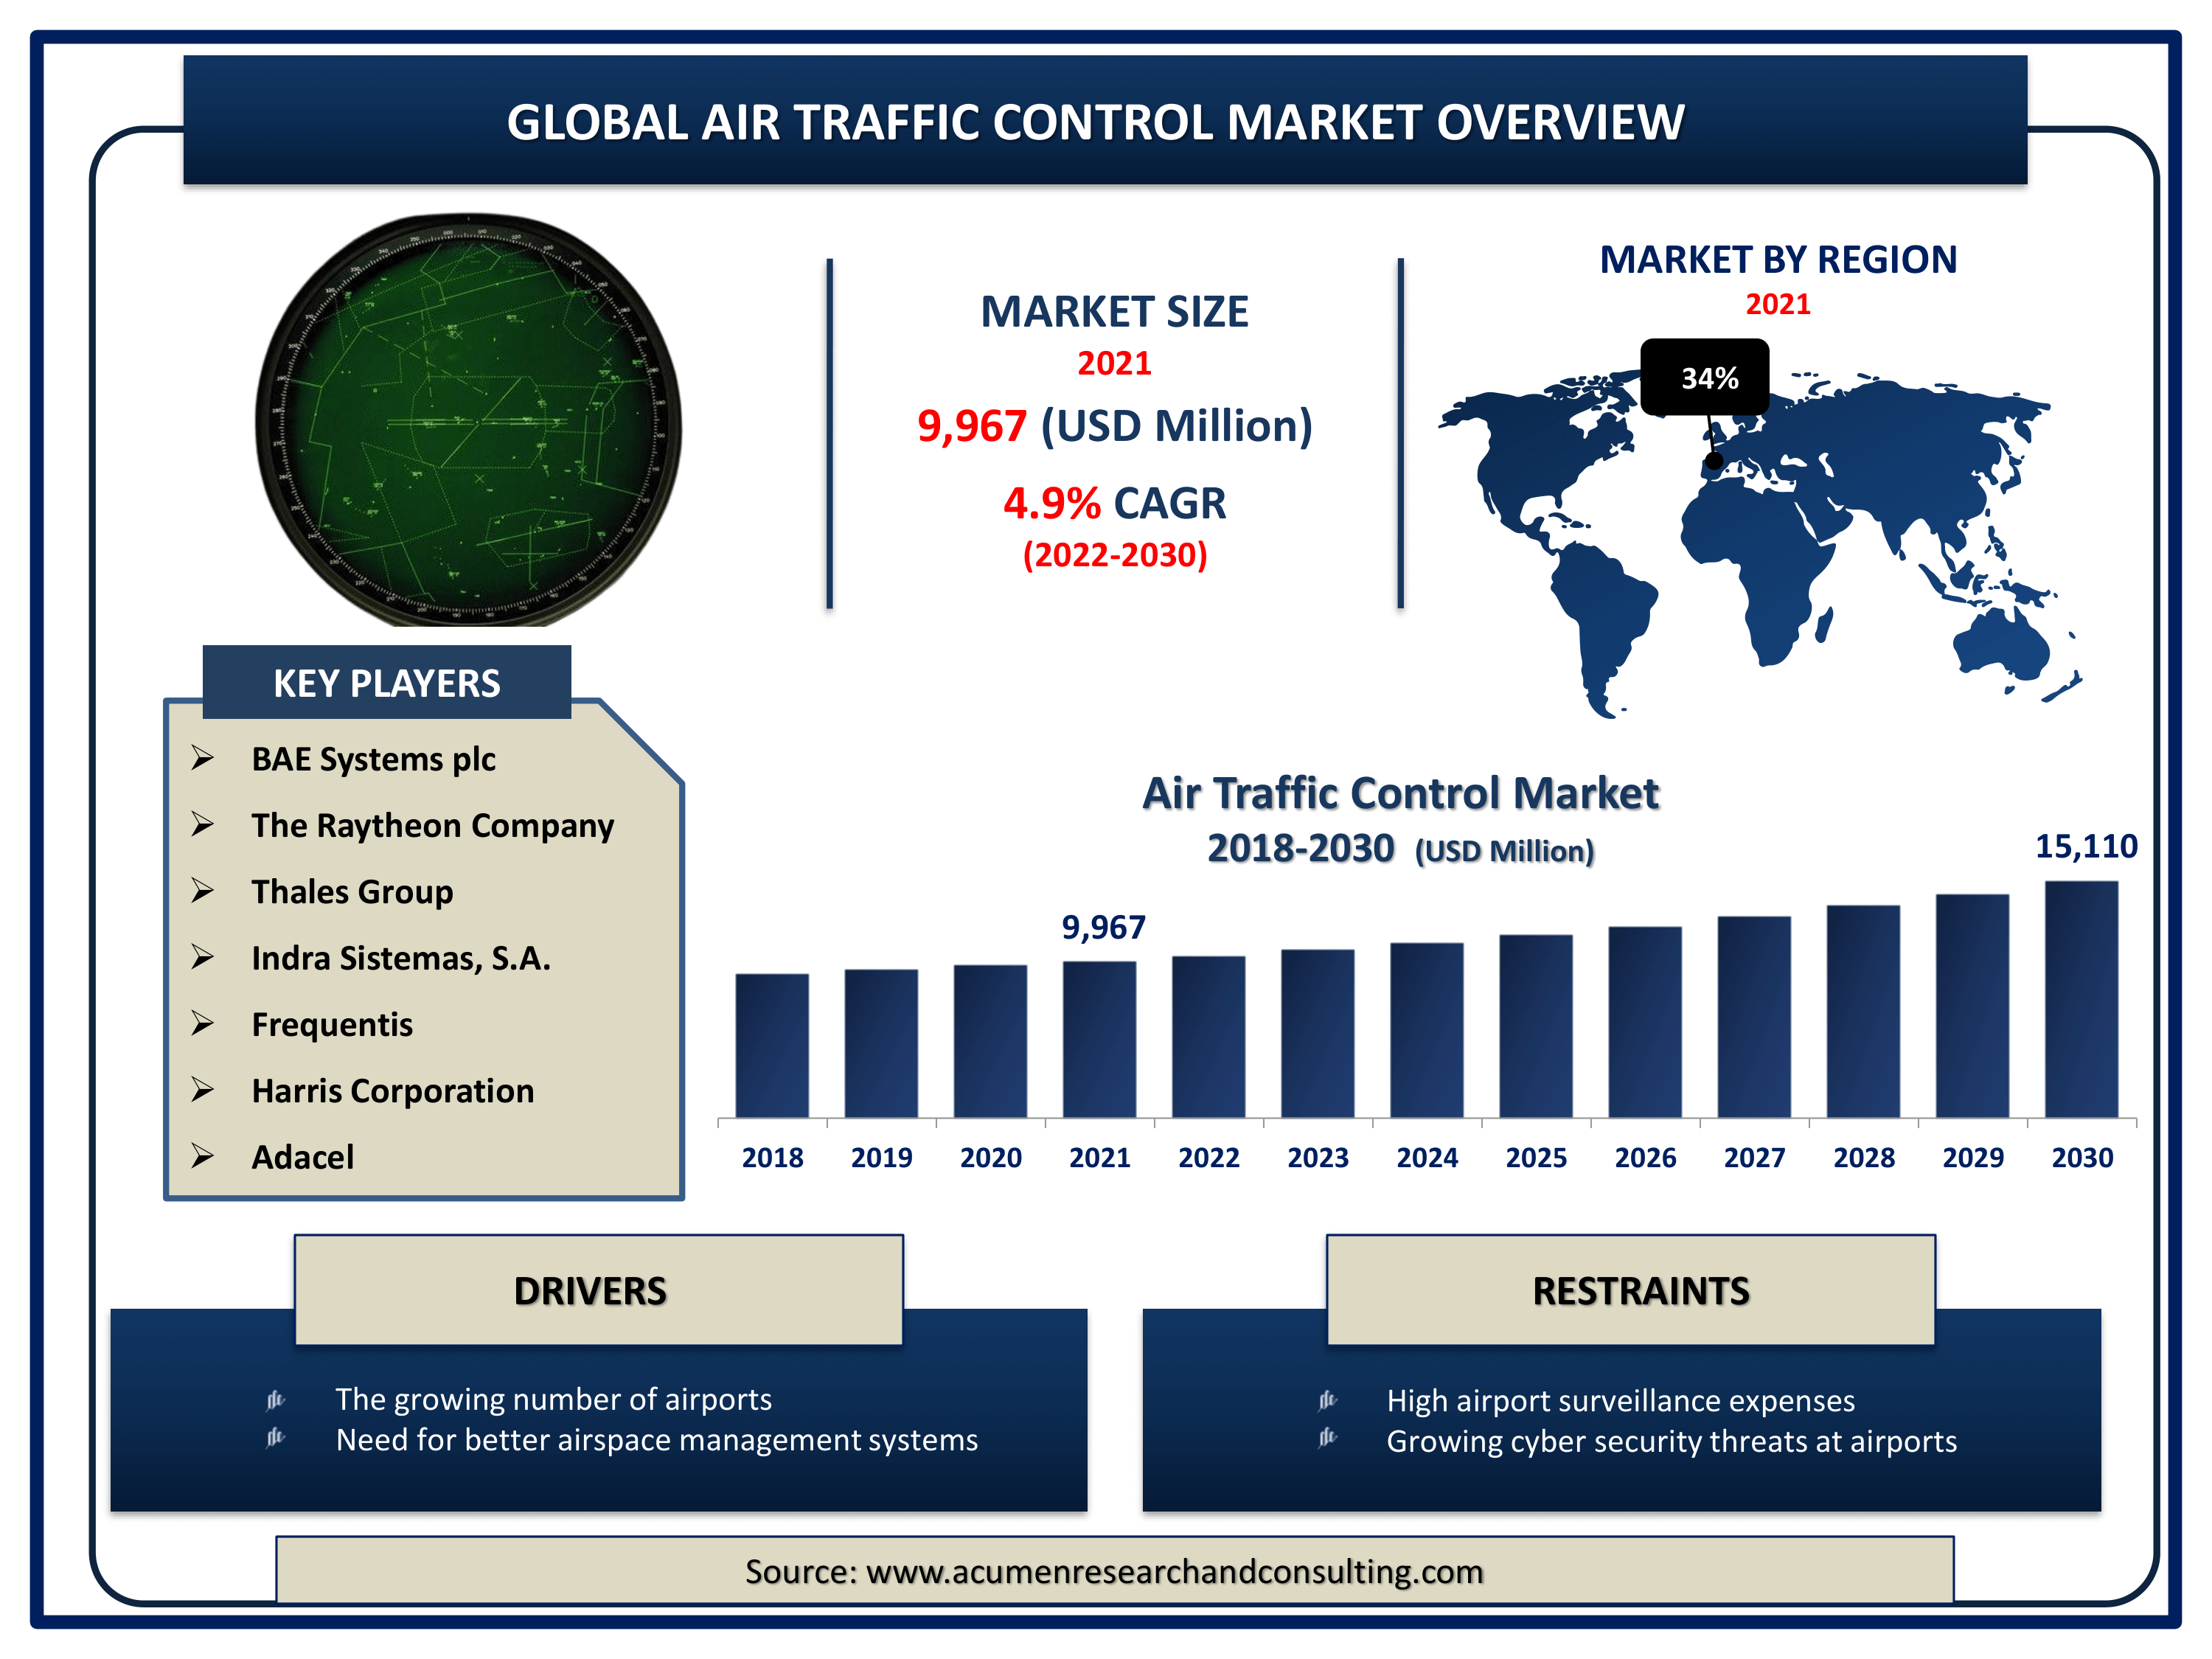 Global air traffic control market revenue intended to gain USD 15,110 million by 2030 with a CAGR of 4.9% from 2022 to 2030